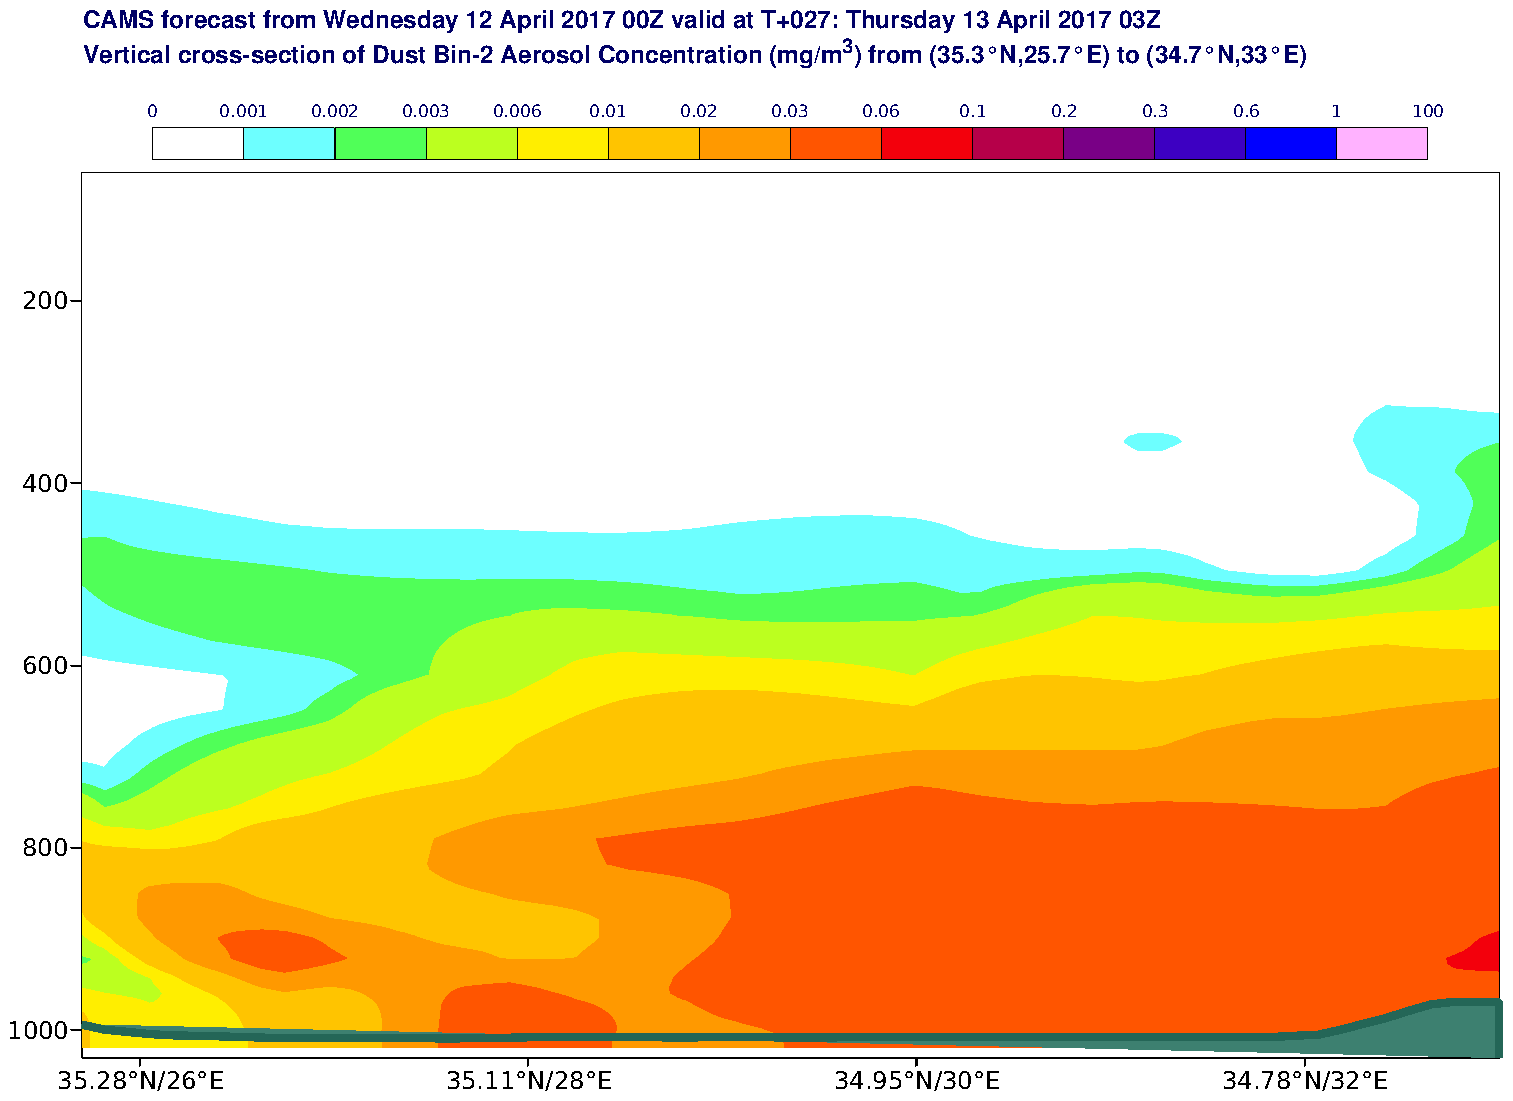 Vertical cross-section of Dust Bin-2 Aerosol Concentration (mg/m3) valid at T27 - 2017-04-13 03:00